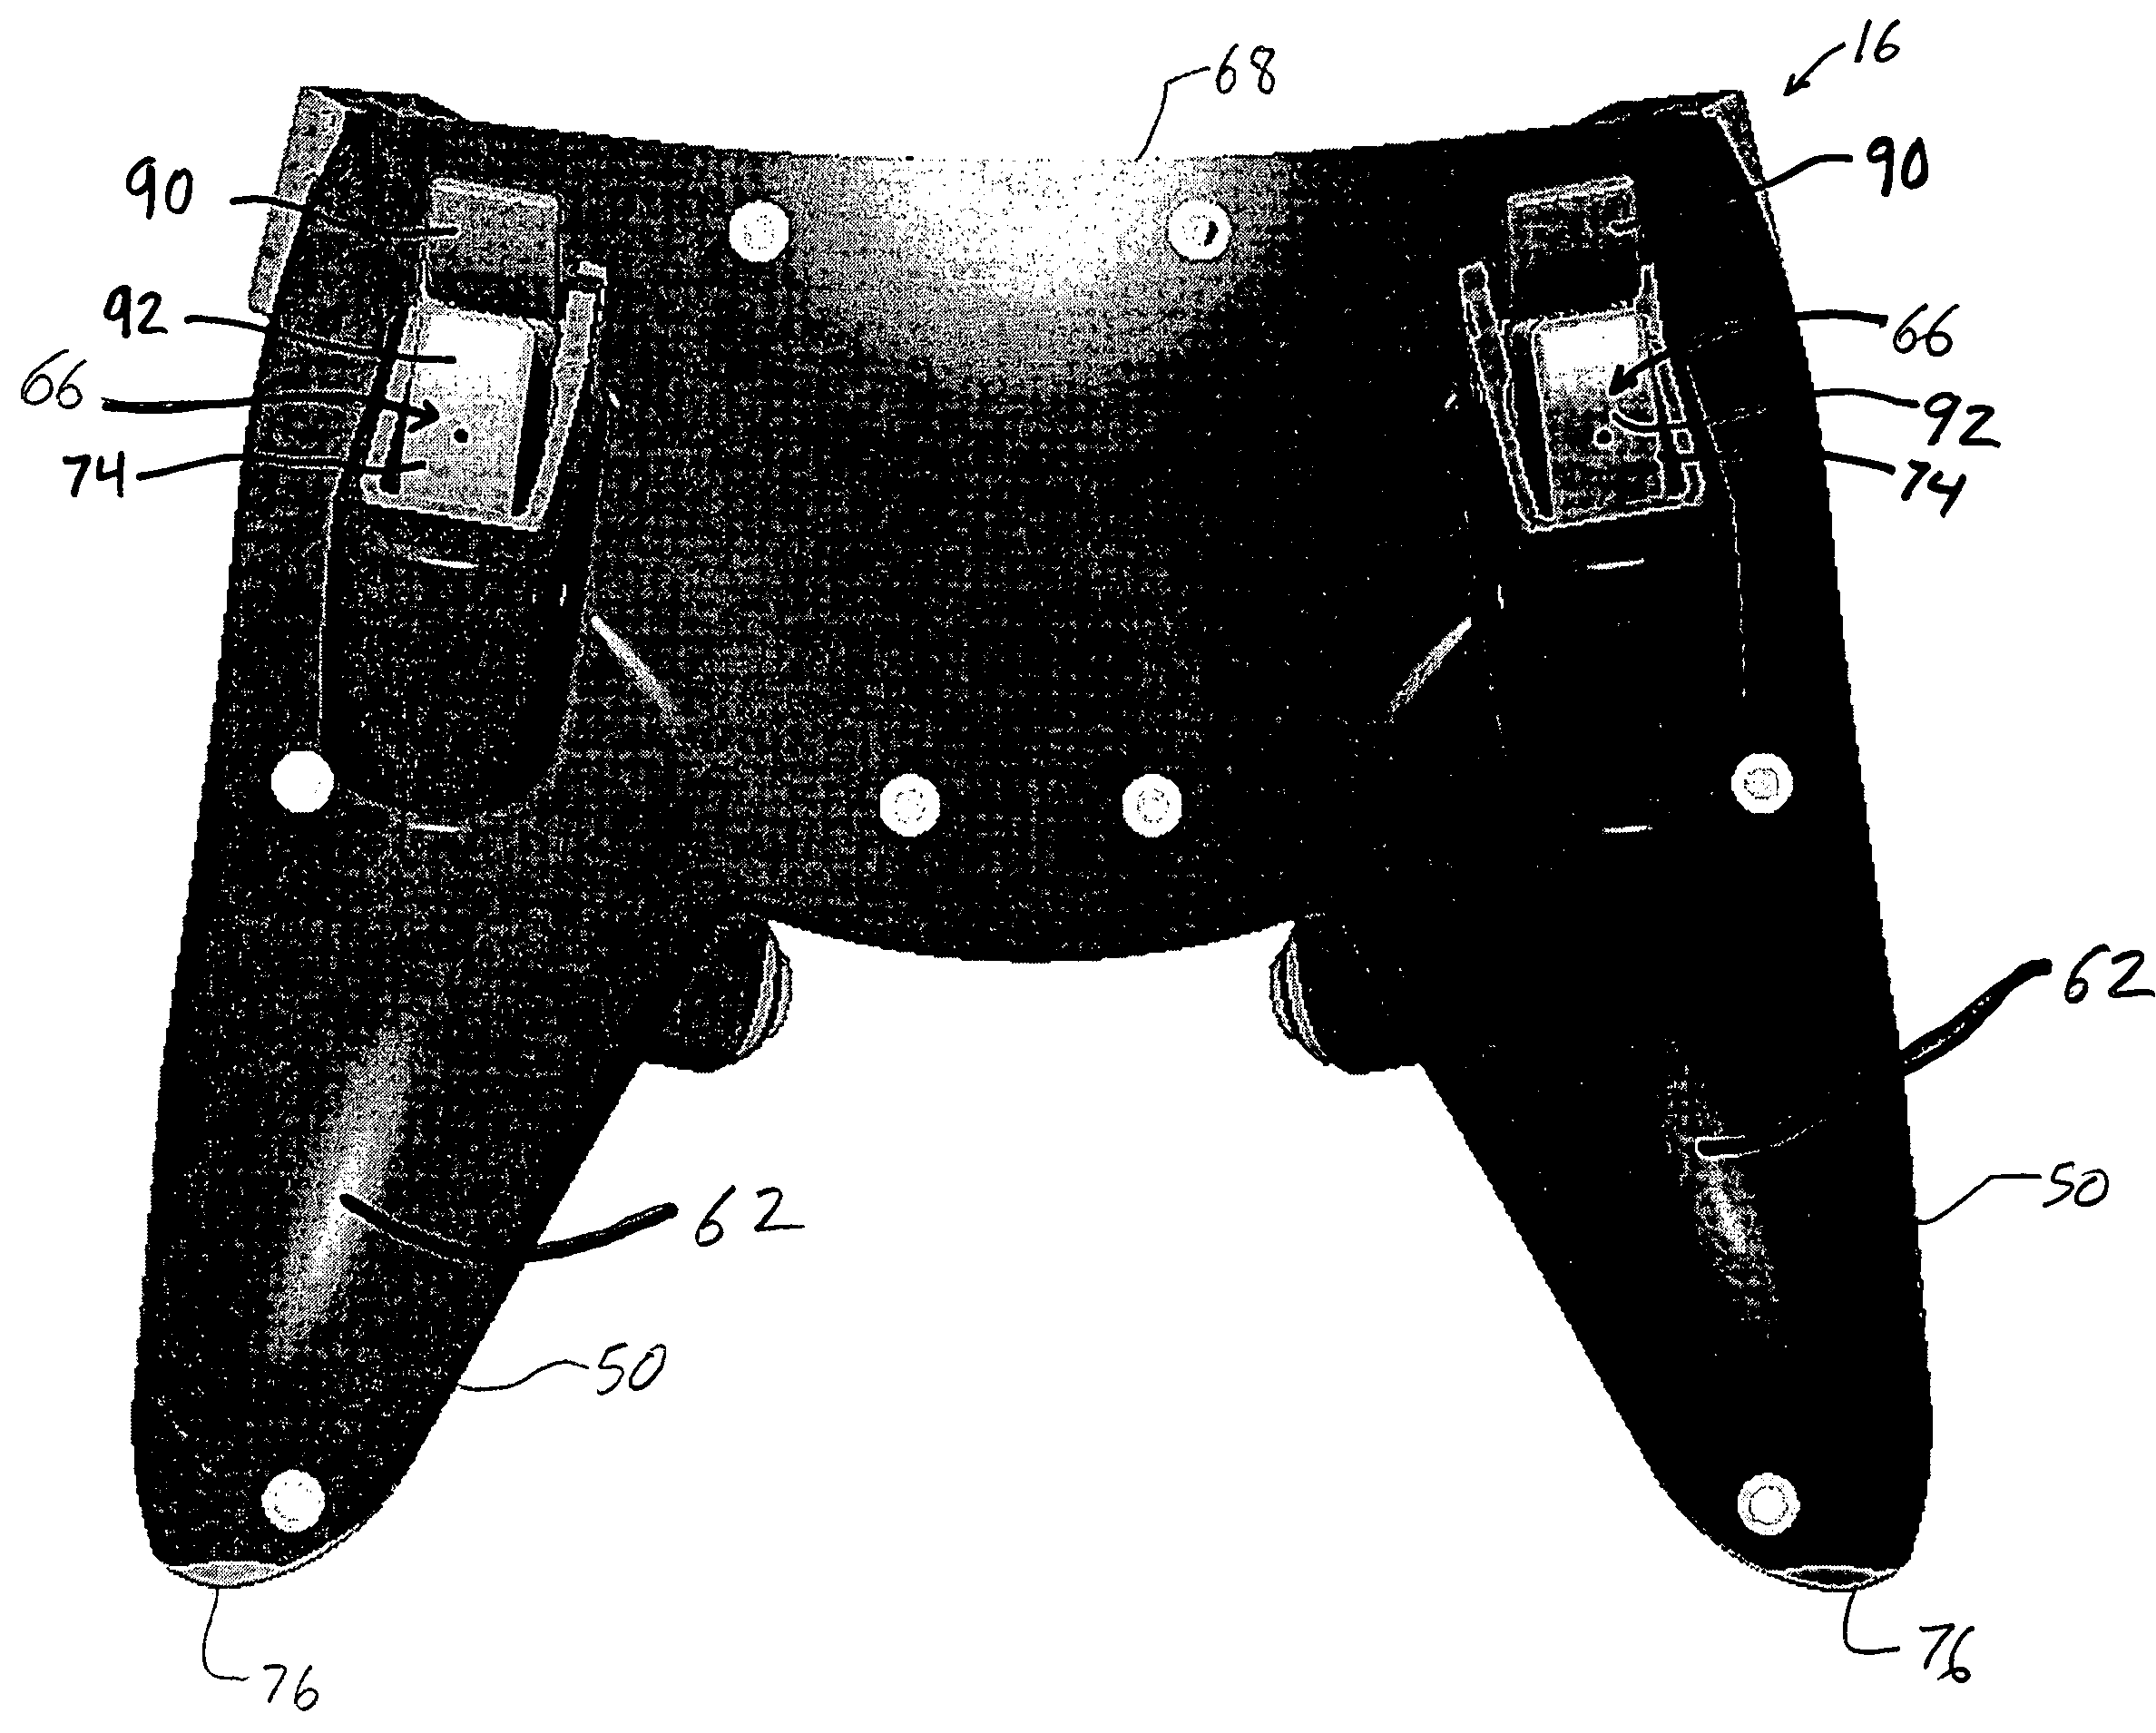 Handheld controller for vehicles